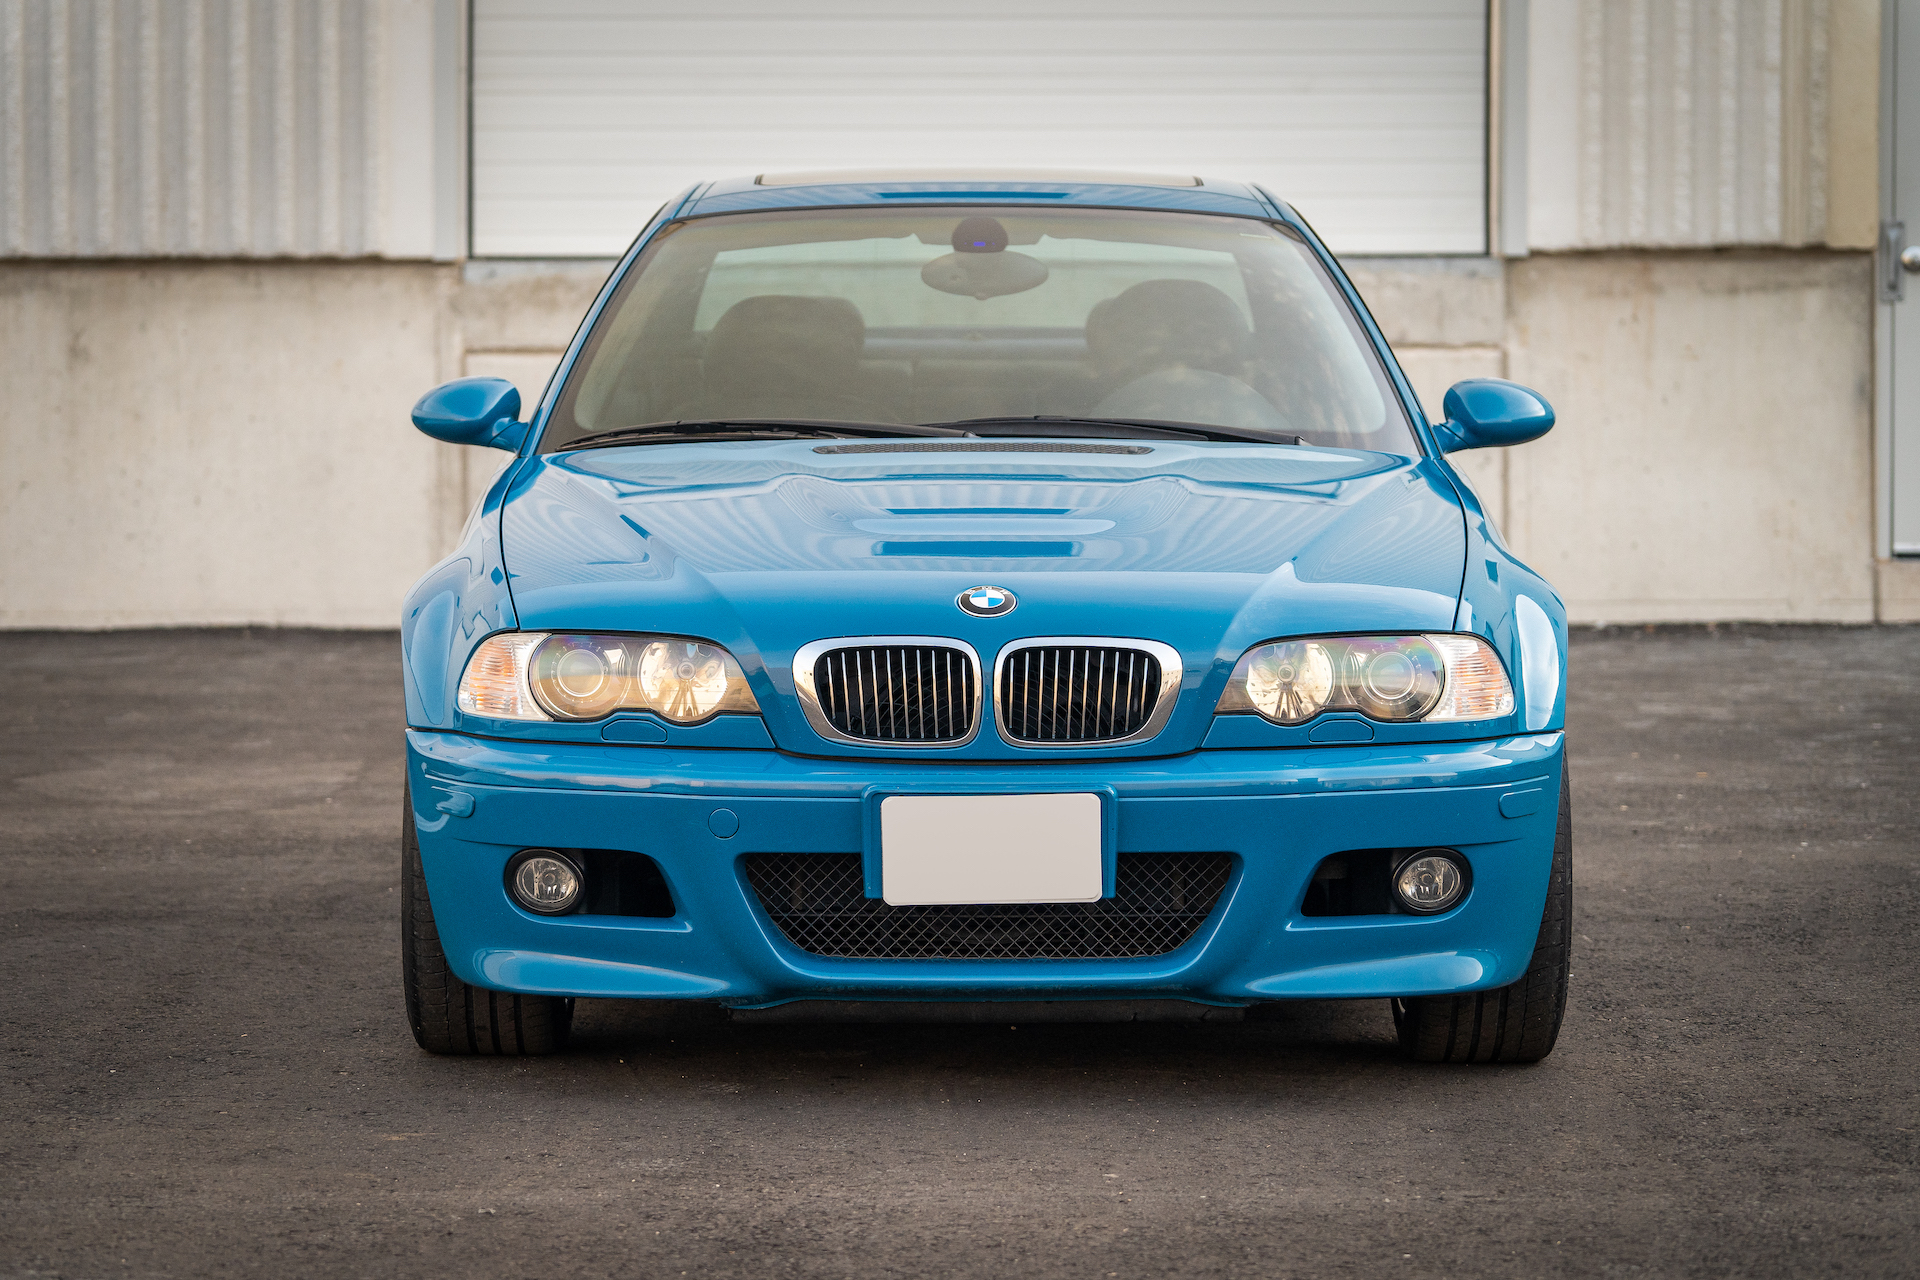 01 Bmw M3 Sold For 36k Proves The E46 Ages Like Fine Wine Carscoops